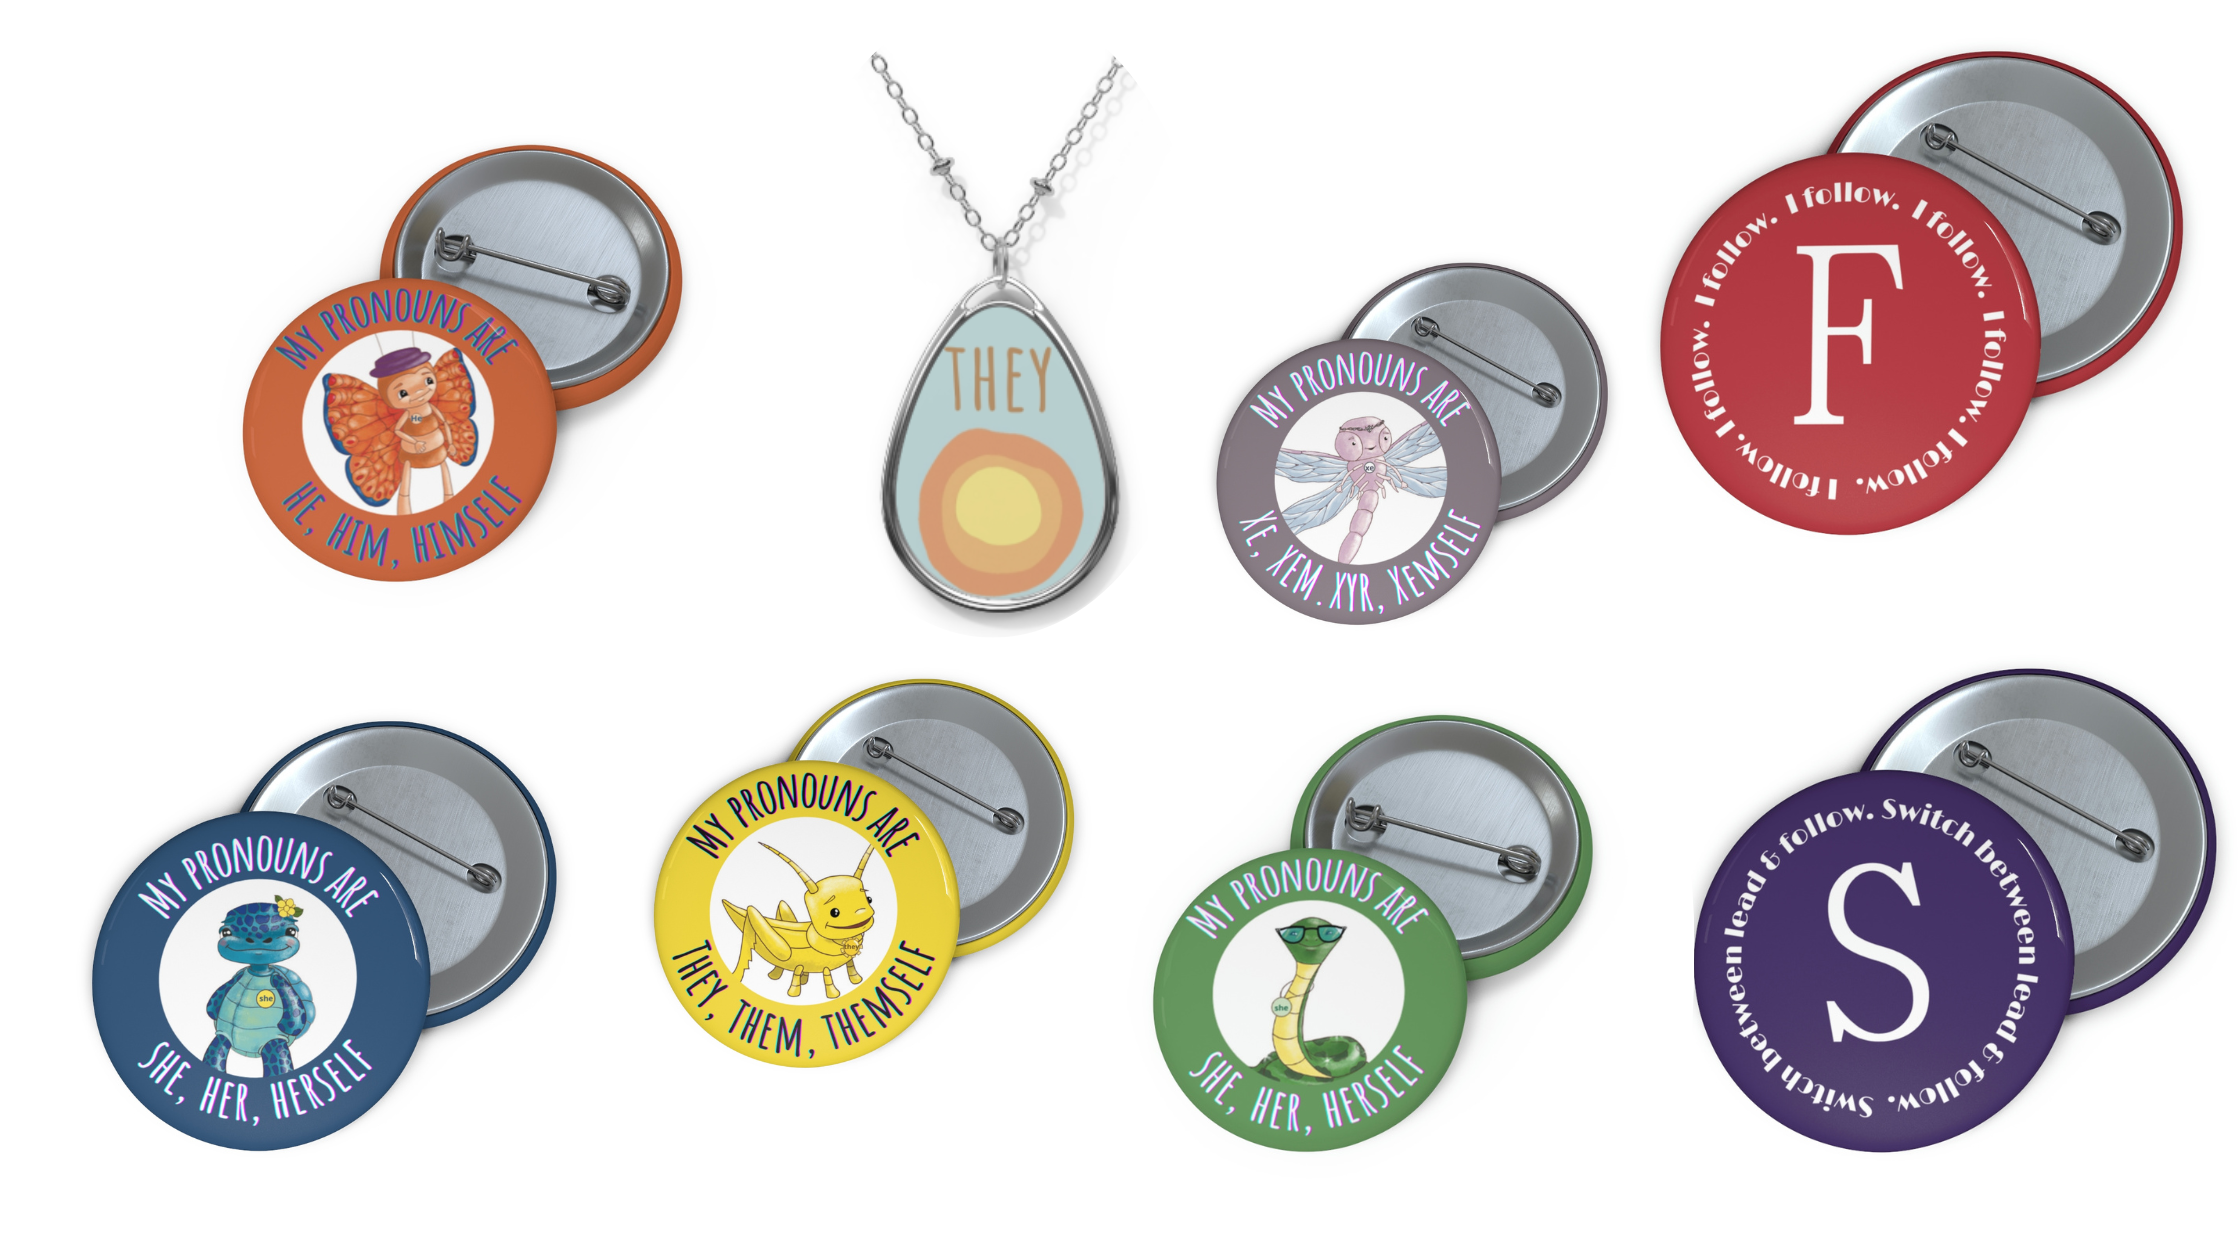 a variety of pronoun badges and pin buttons in a rainbow of colors.